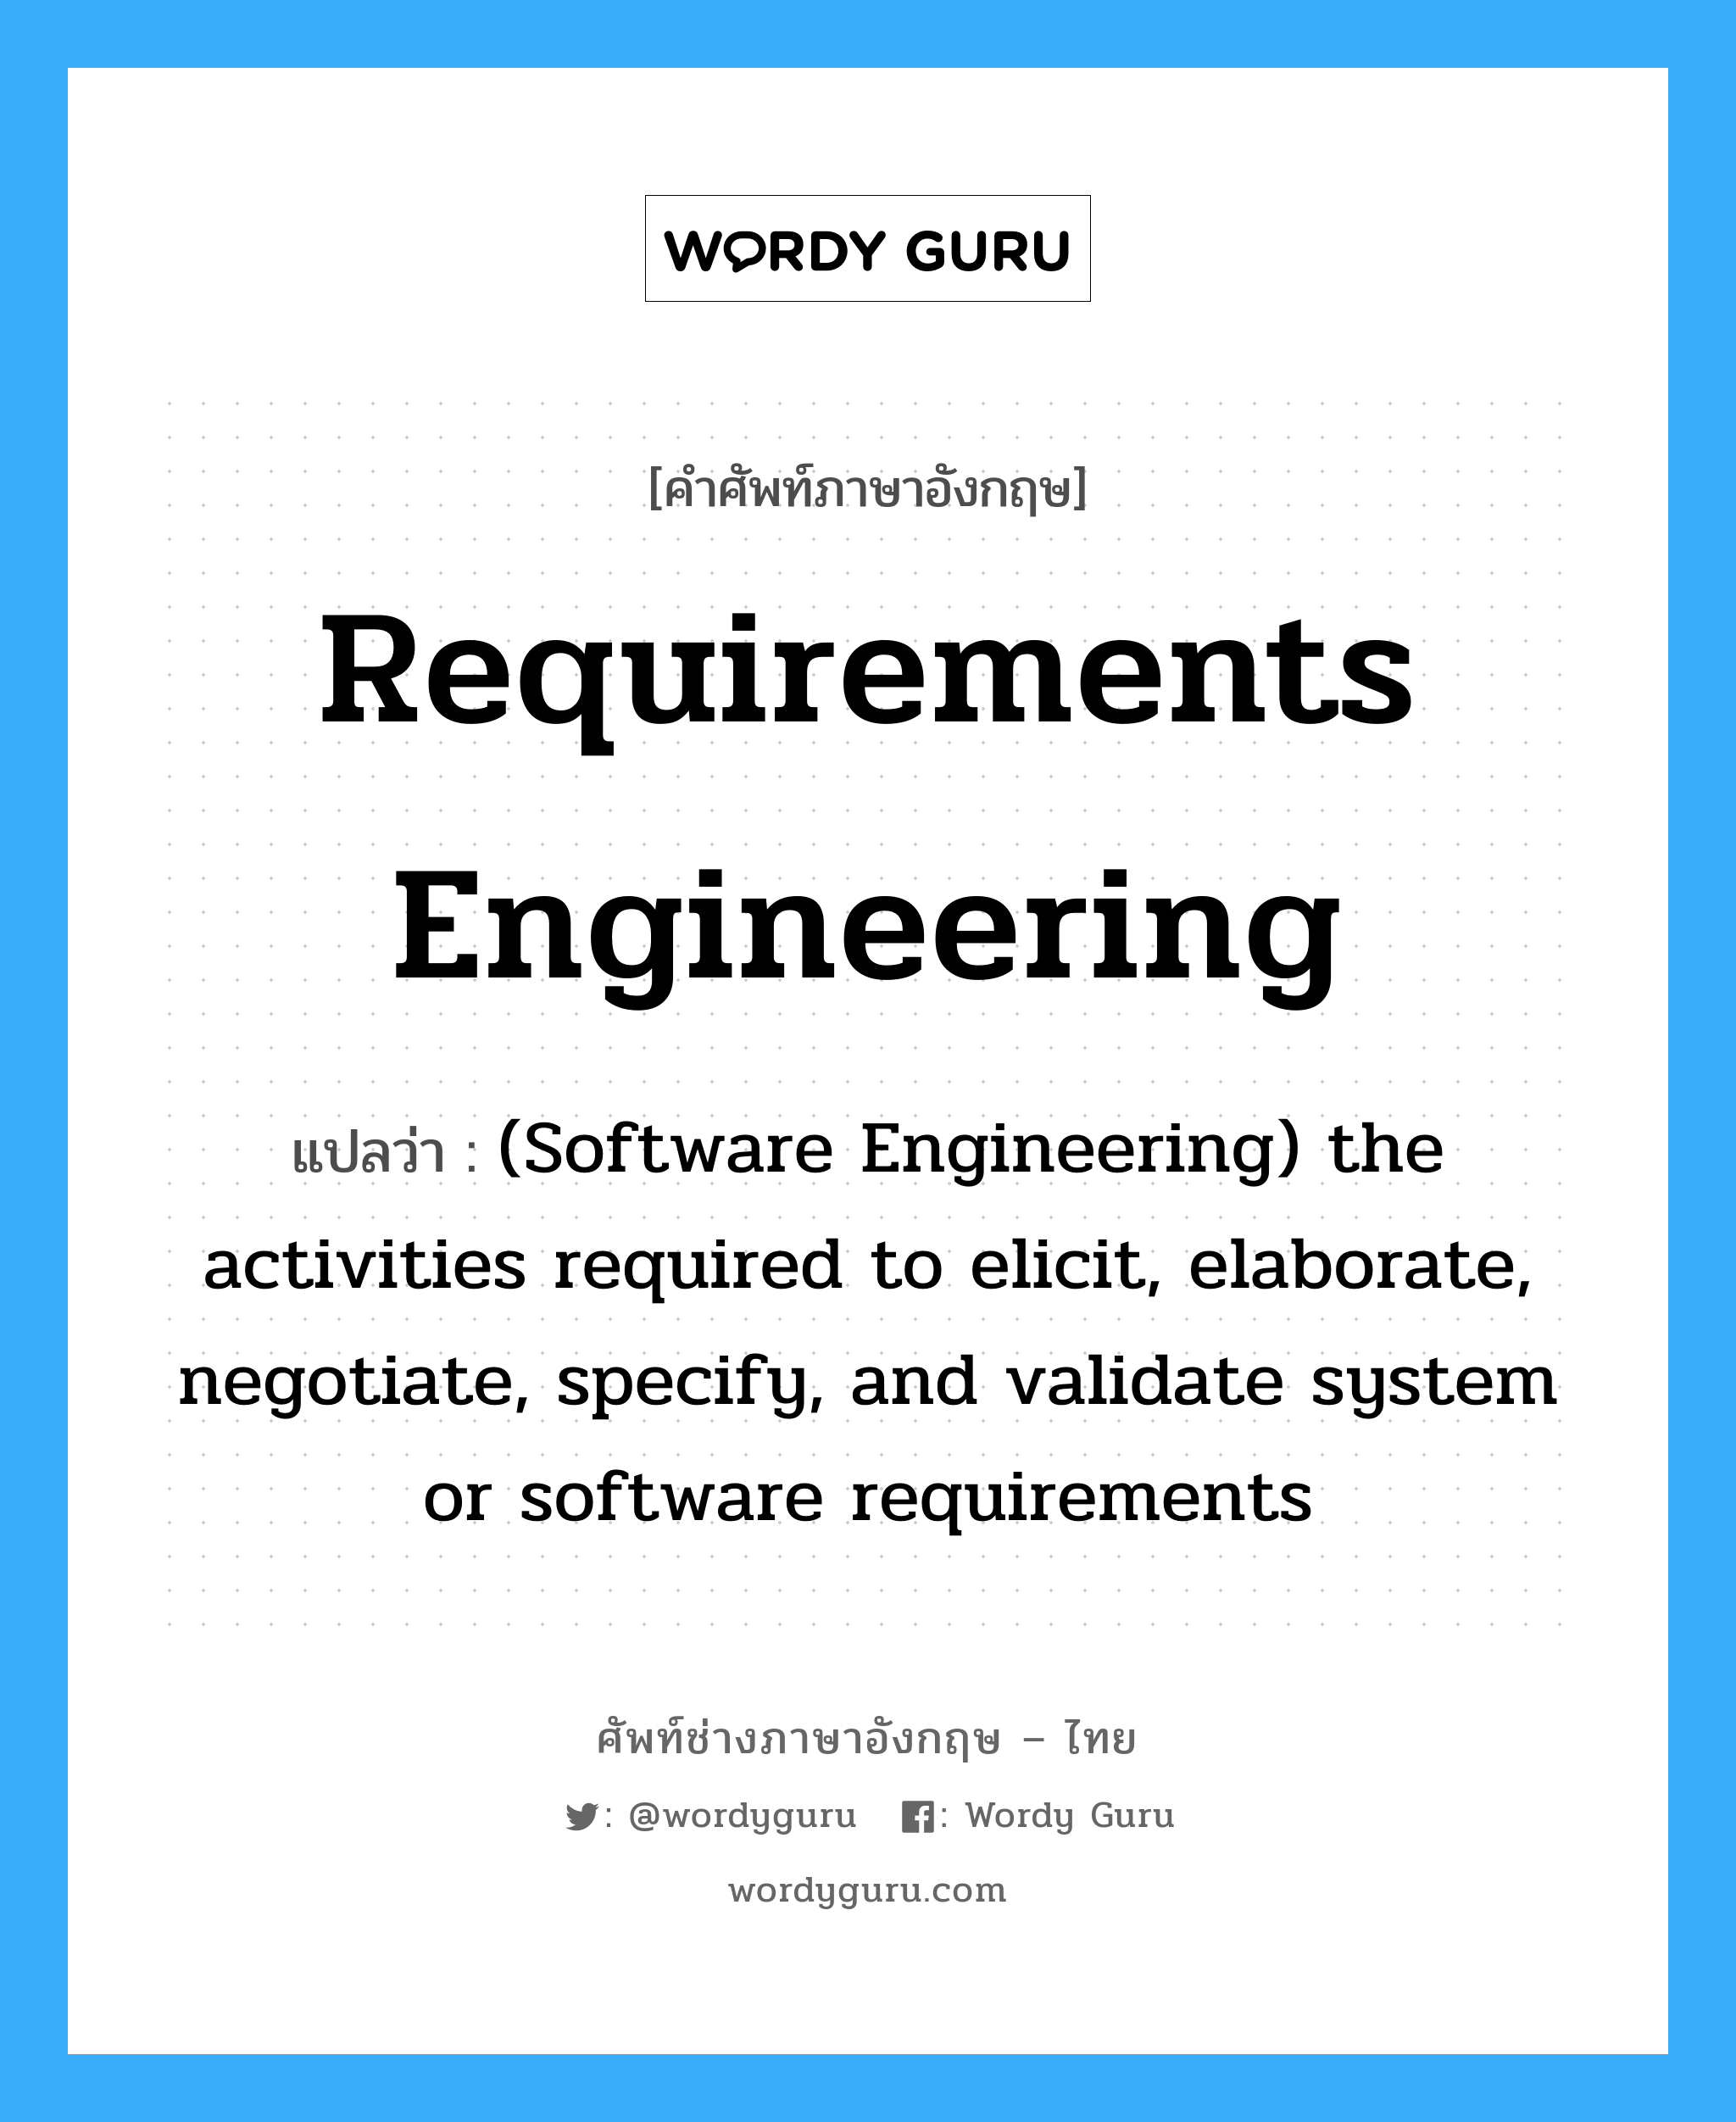 (Software Engineering) the activities required to elicit, elaborate, negotiate, specify, and validate system or software requirements ภาษาอังกฤษ?, คำศัพท์ช่างภาษาอังกฤษ - ไทย (Software Engineering) the activities required to elicit, elaborate, negotiate, specify, and validate system or software requirements คำศัพท์ภาษาอังกฤษ (Software Engineering) the activities required to elicit, elaborate, negotiate, specify, and validate system or software requirements แปลว่า Requirements engineering